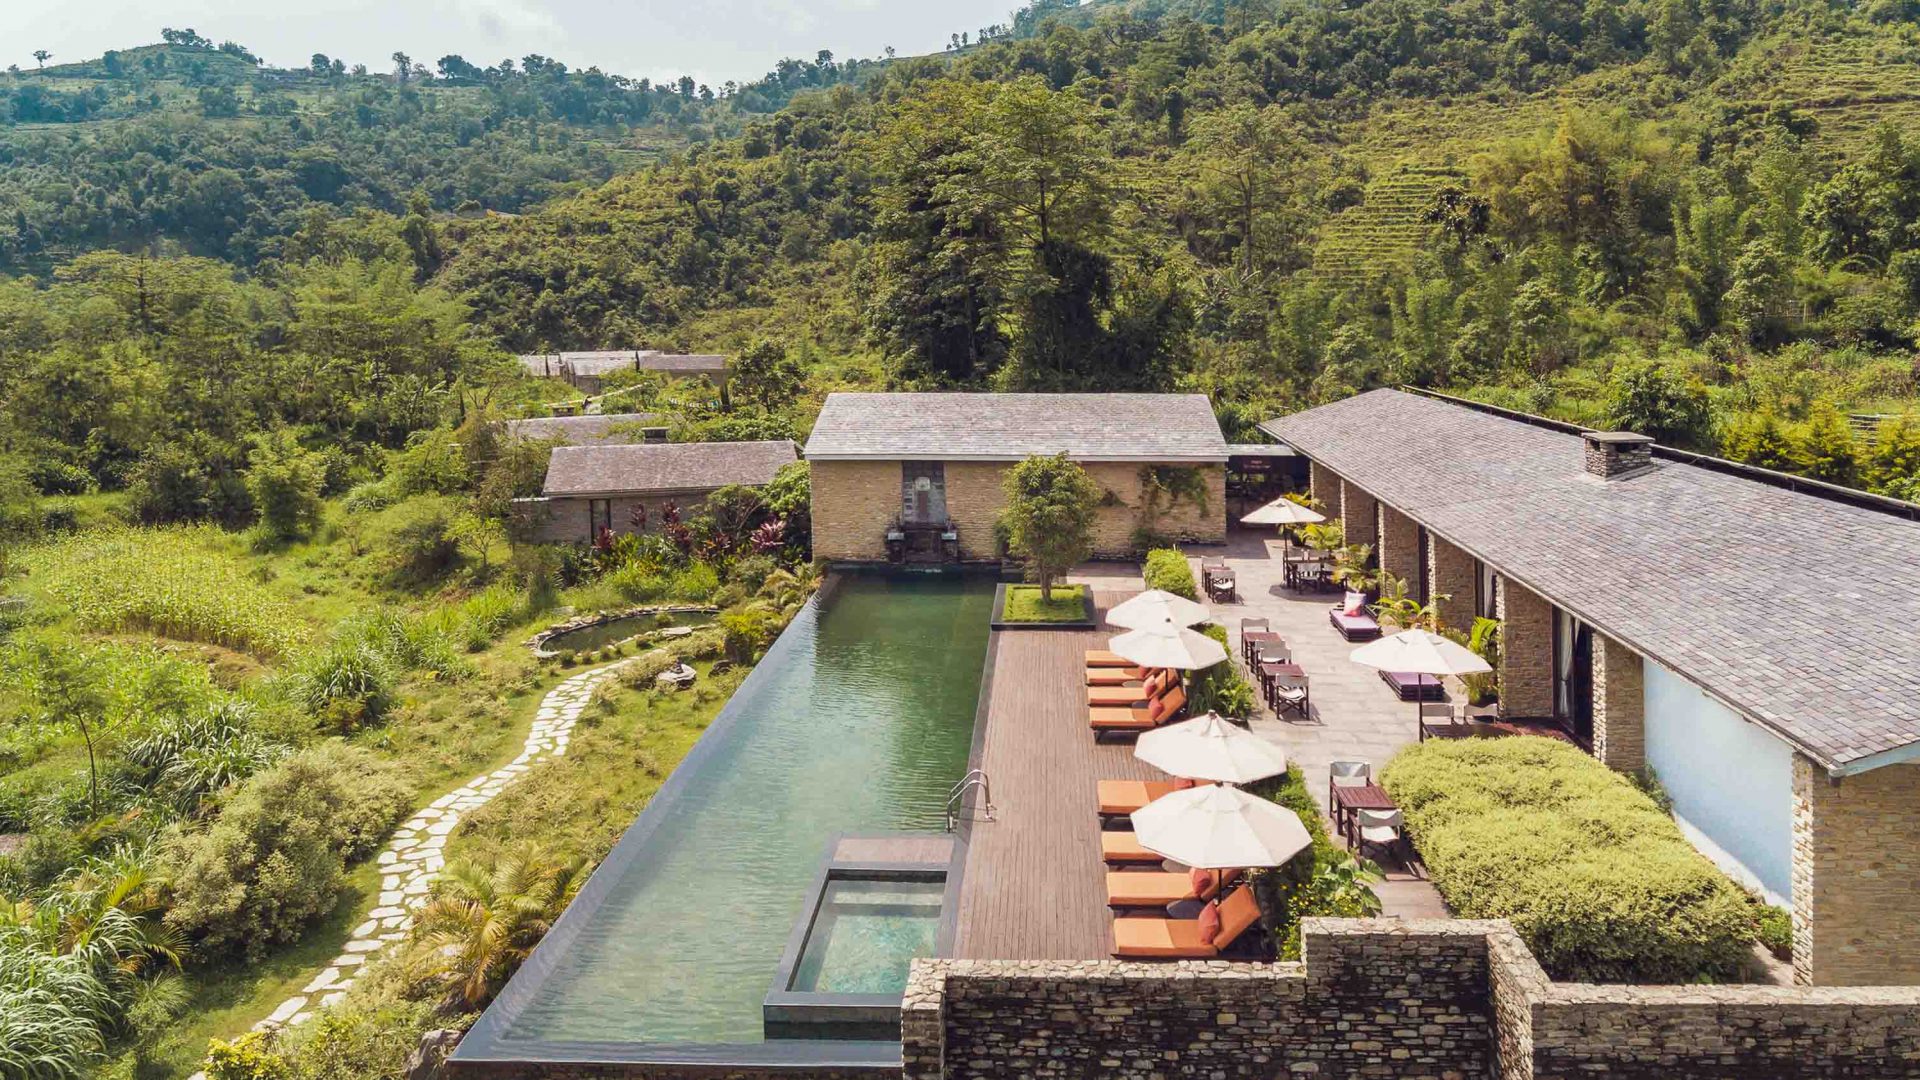 A hotel with a pool surrounded by green hills.